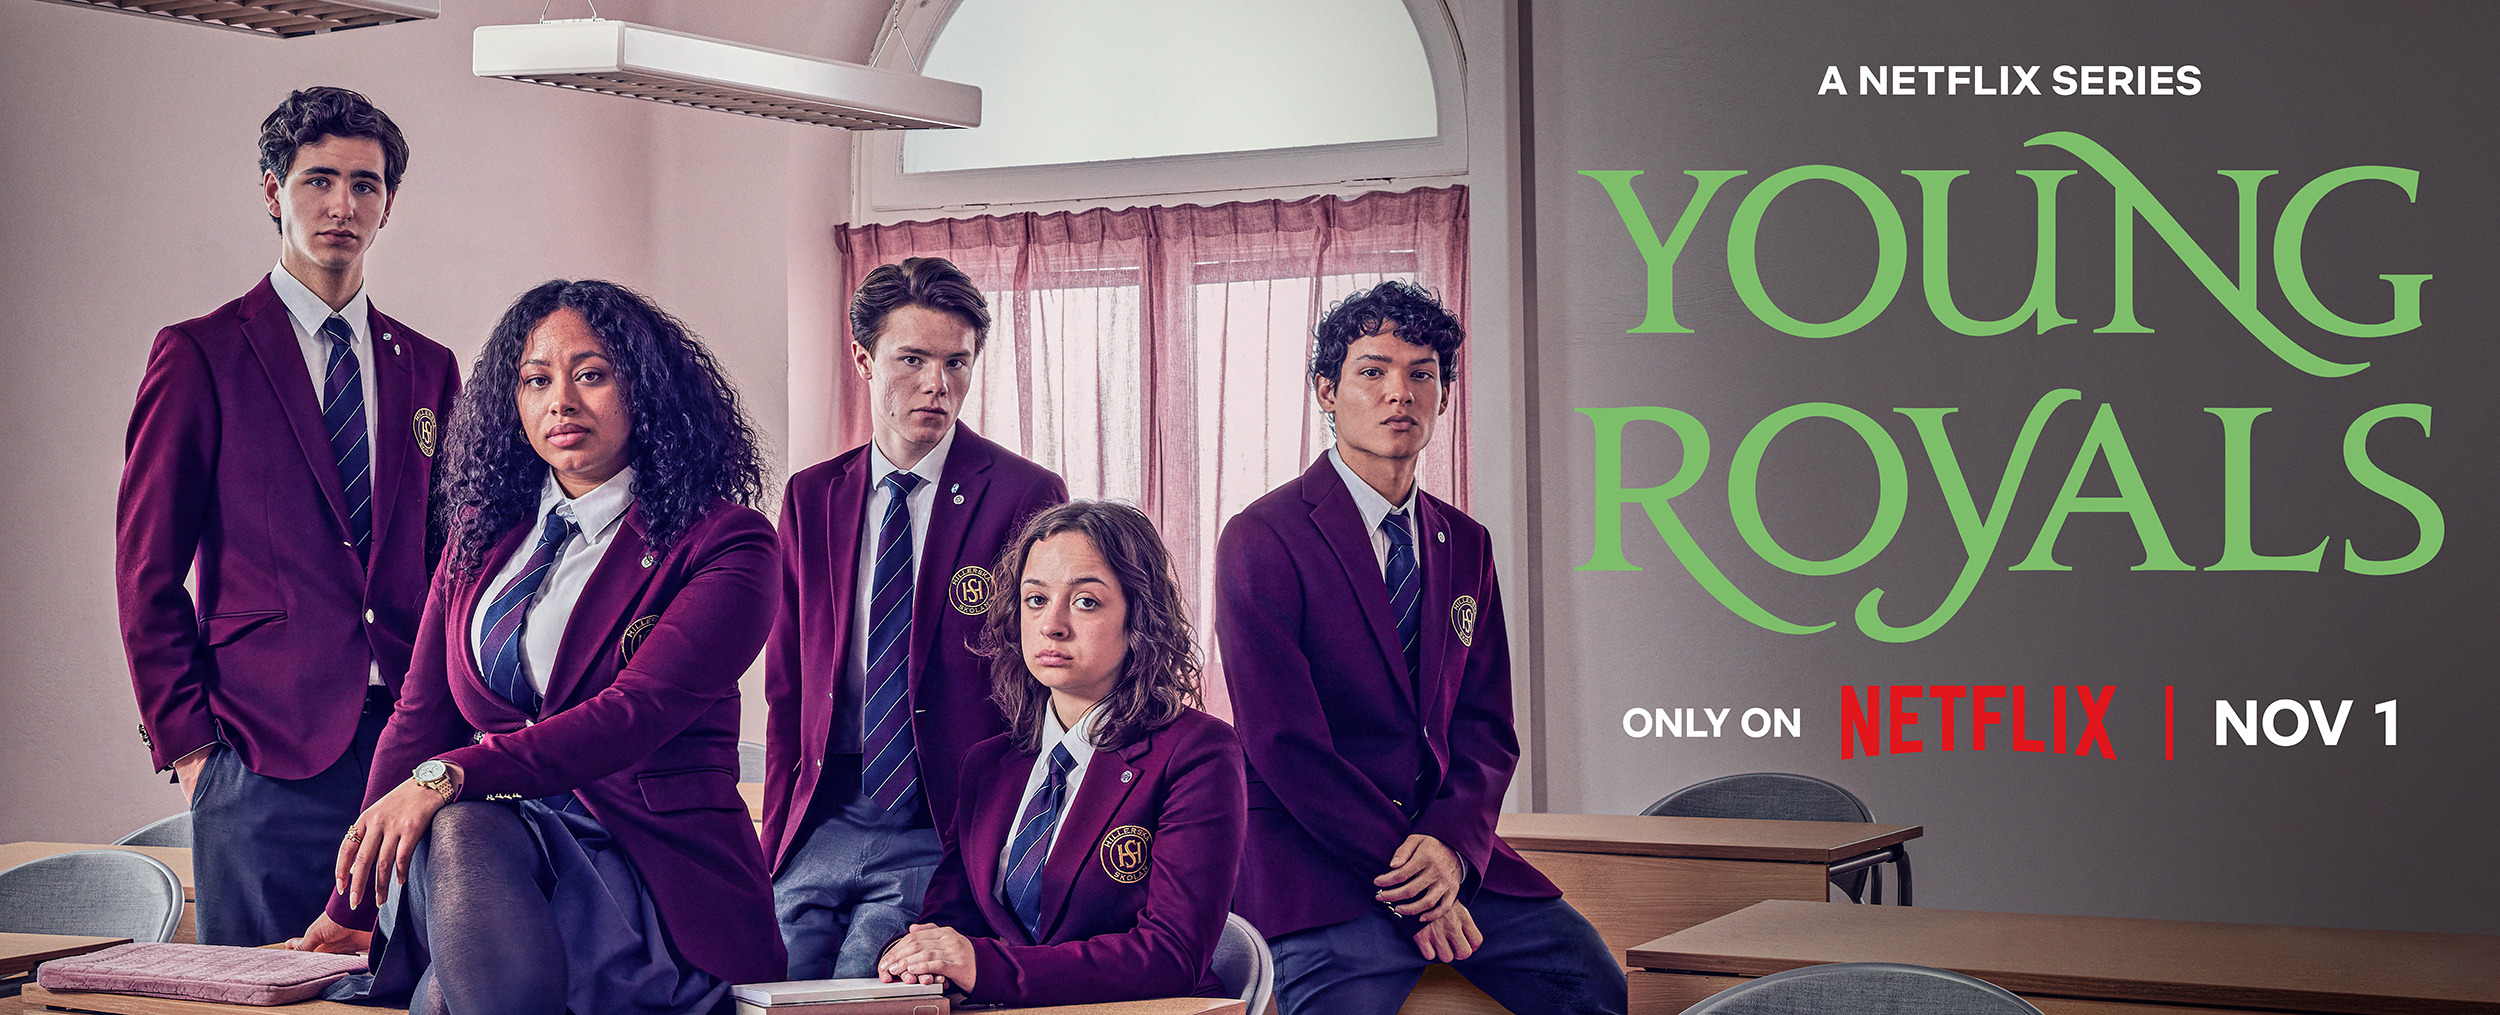 Mega Sized TV Poster Image for Young Royals (#2 of 4)